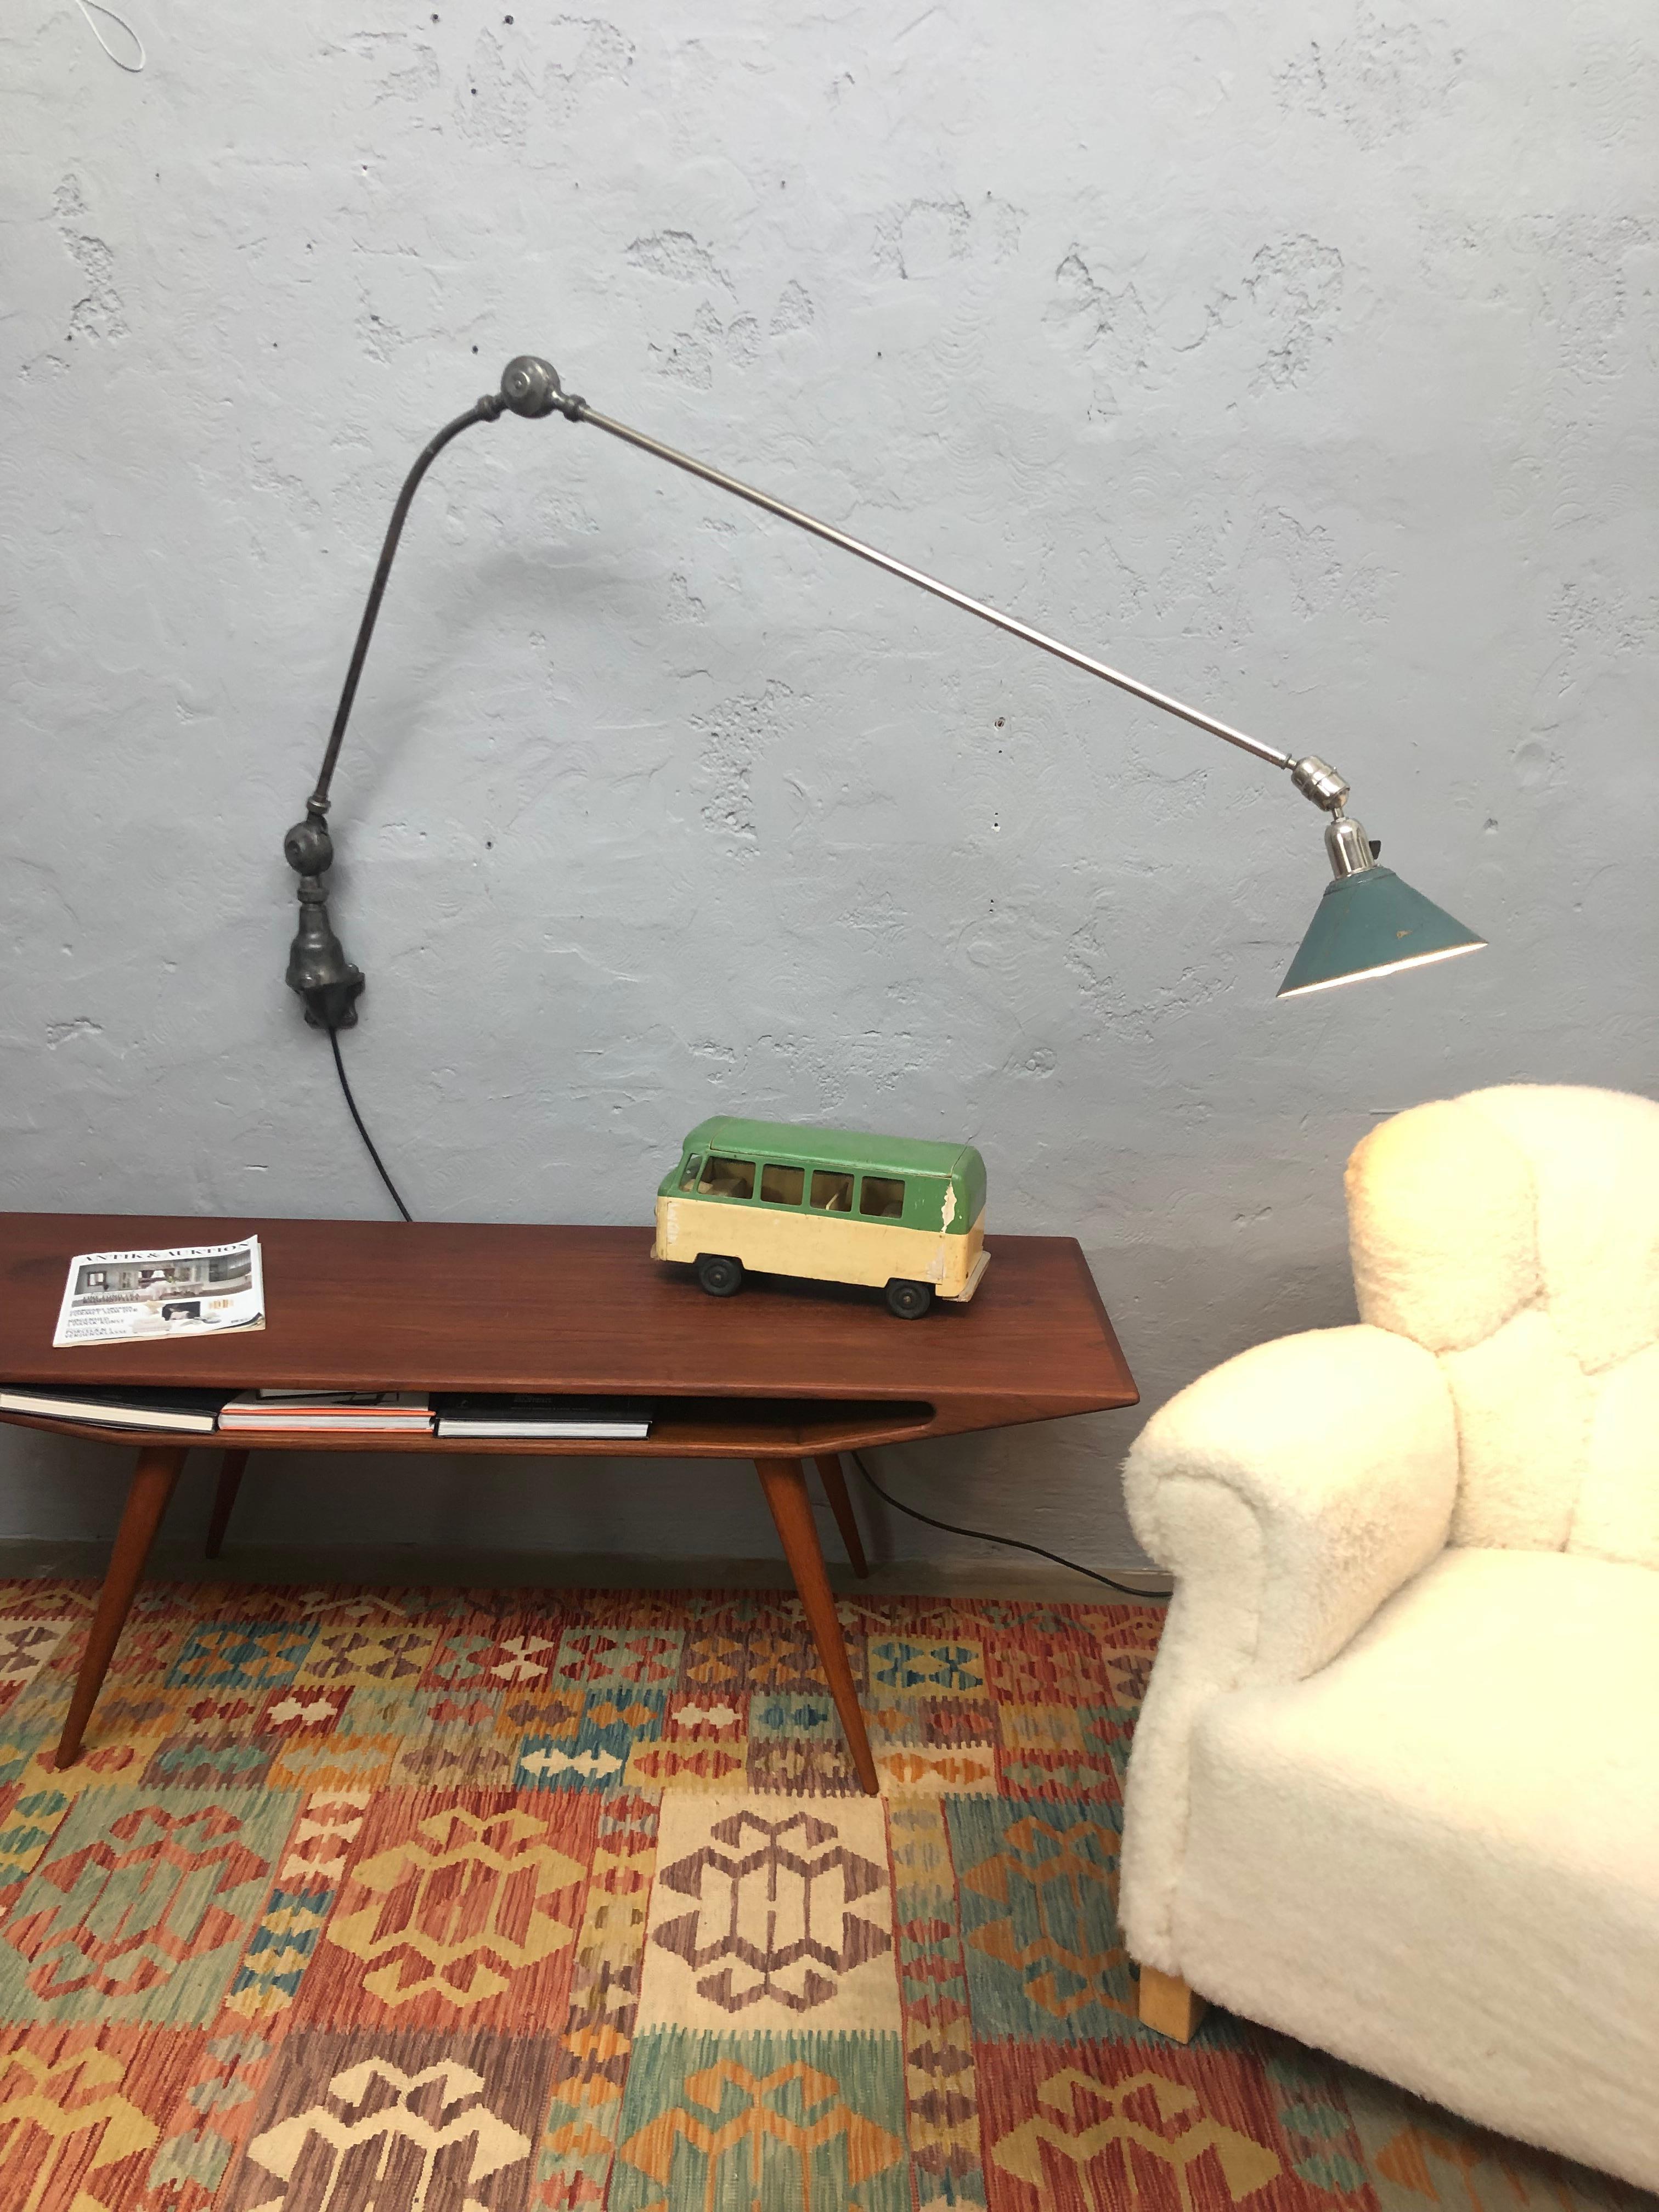 An iconic Triplex wall lamp from the 1930s in original condition. 
Still with its original green cardboard shade. 
ASEA of Sweden created some of the most iconic lamps of the period.
Designed by Johan Petter Johansson 1853-1943 who was responsible